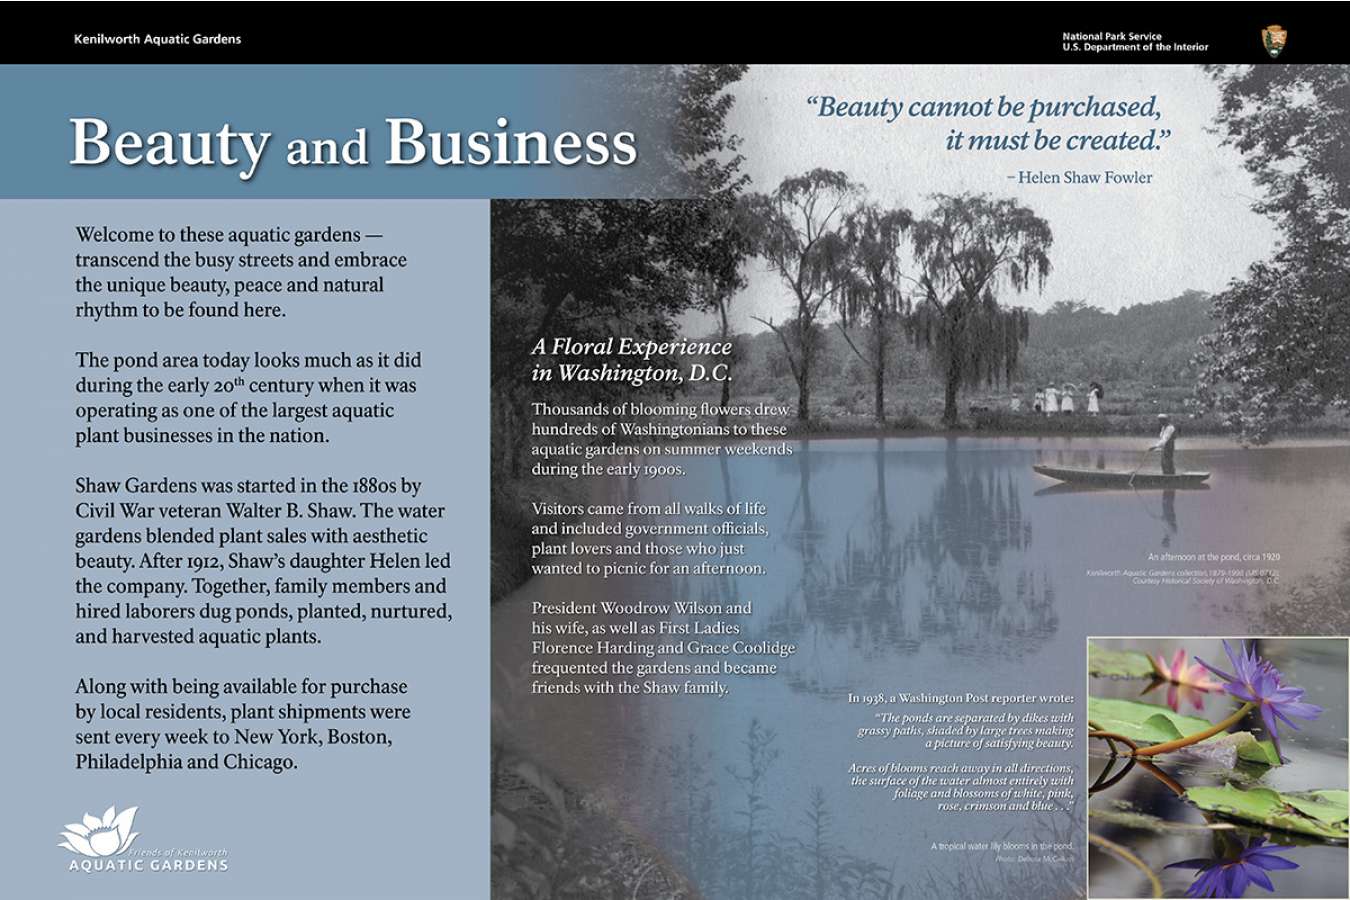 Fokag 1 : Beauty & Business were blended at the Shaw Gardens Aquatic Plant Business, Prior to becoming a National Park